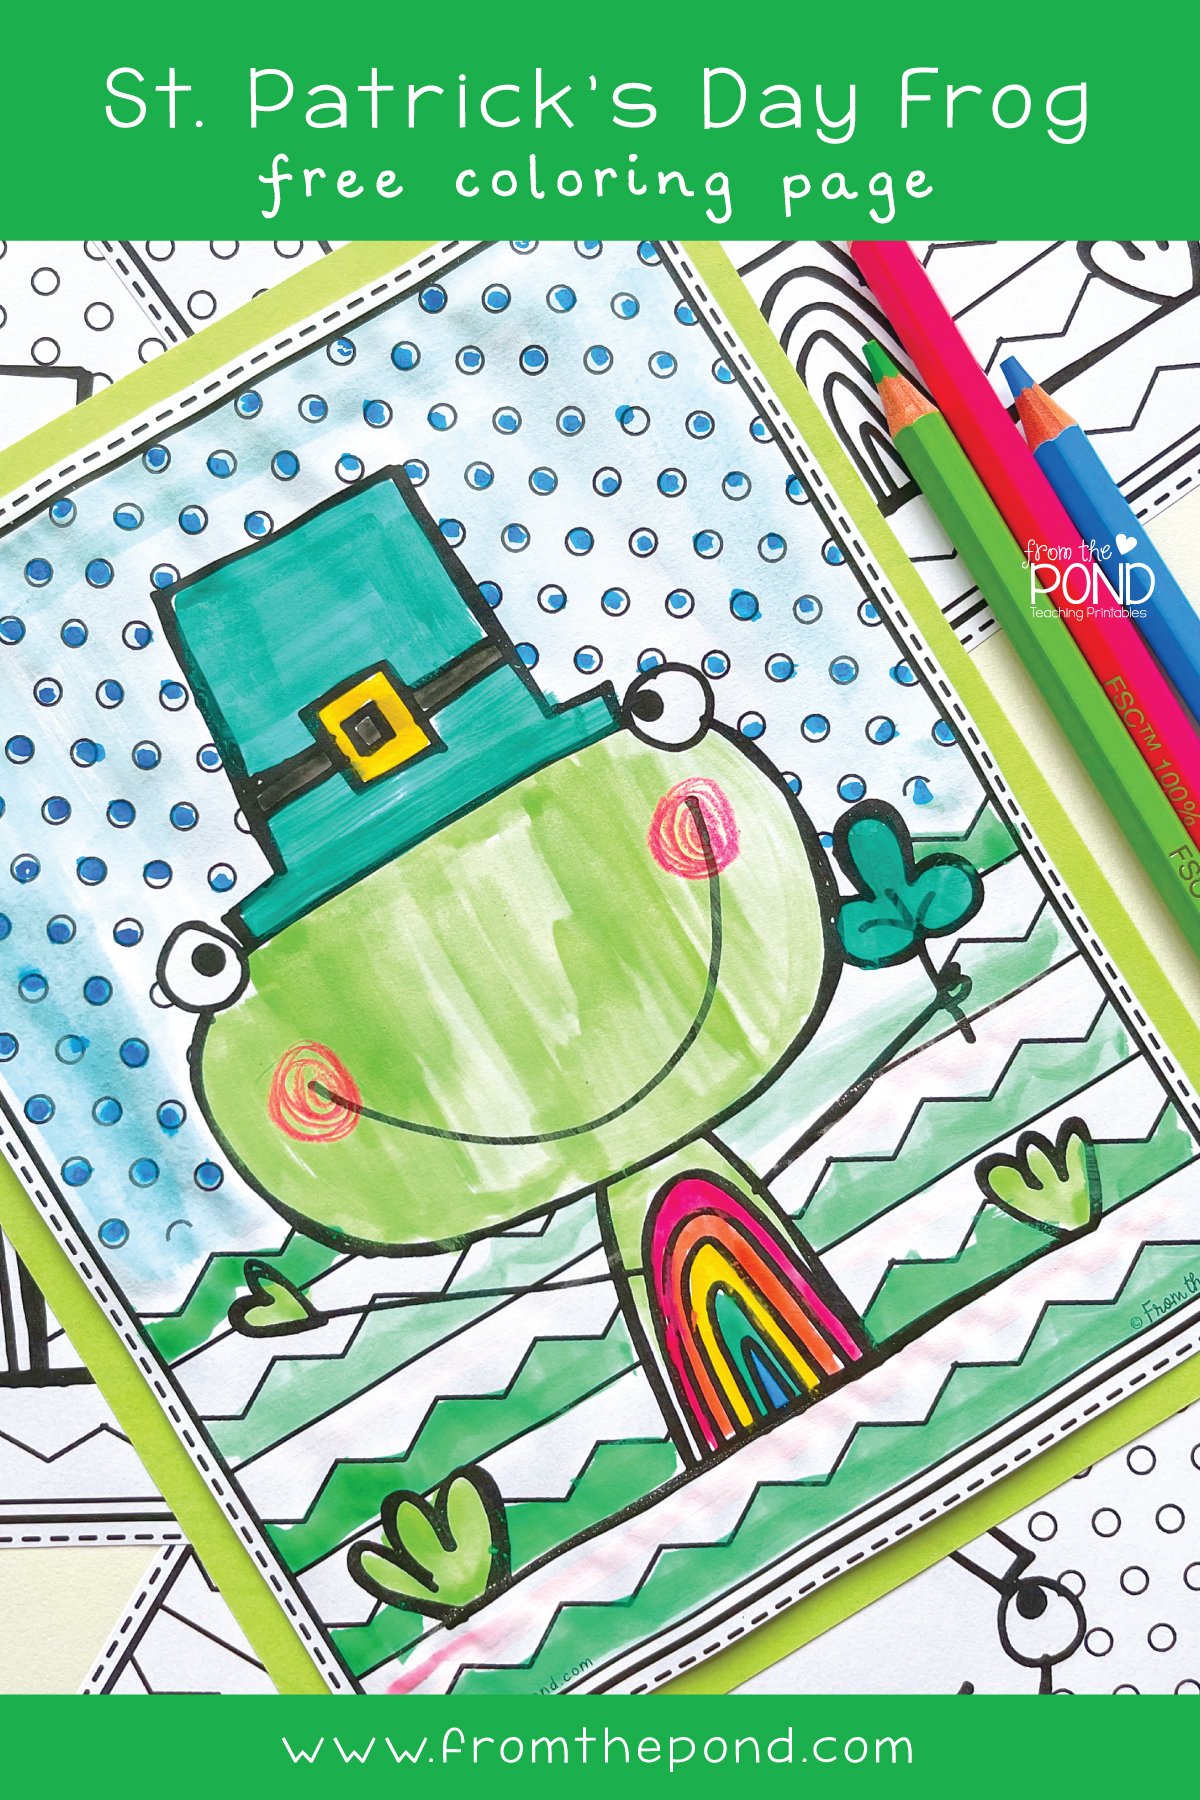 st-patricks-day-frog-coloring-page.jpg